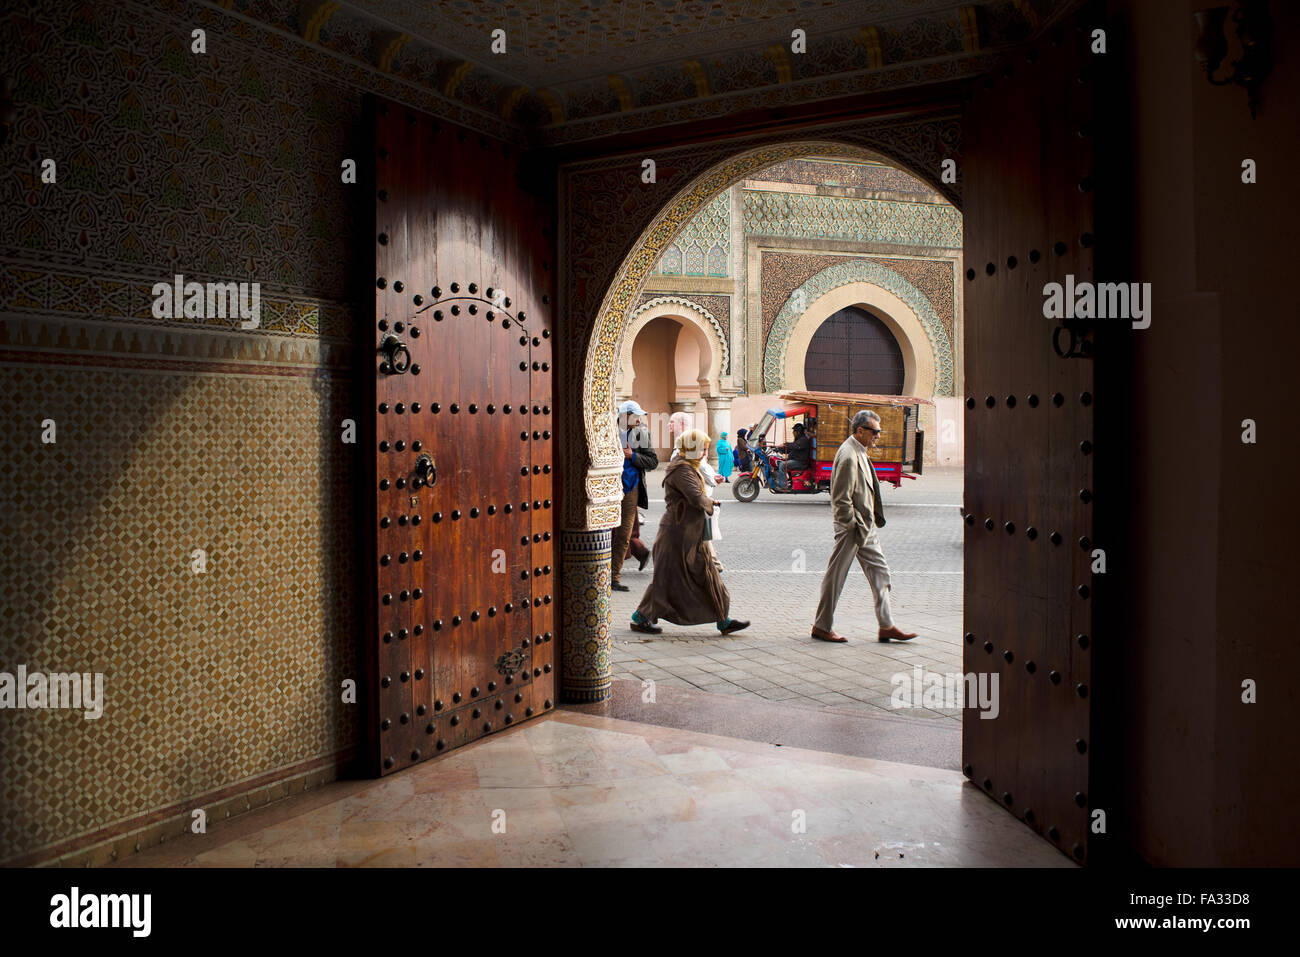 People walking in front of The Bab el Mansour gate, view from inside a entry hall of a classical building. Meknes. Morocco. Stock Photo